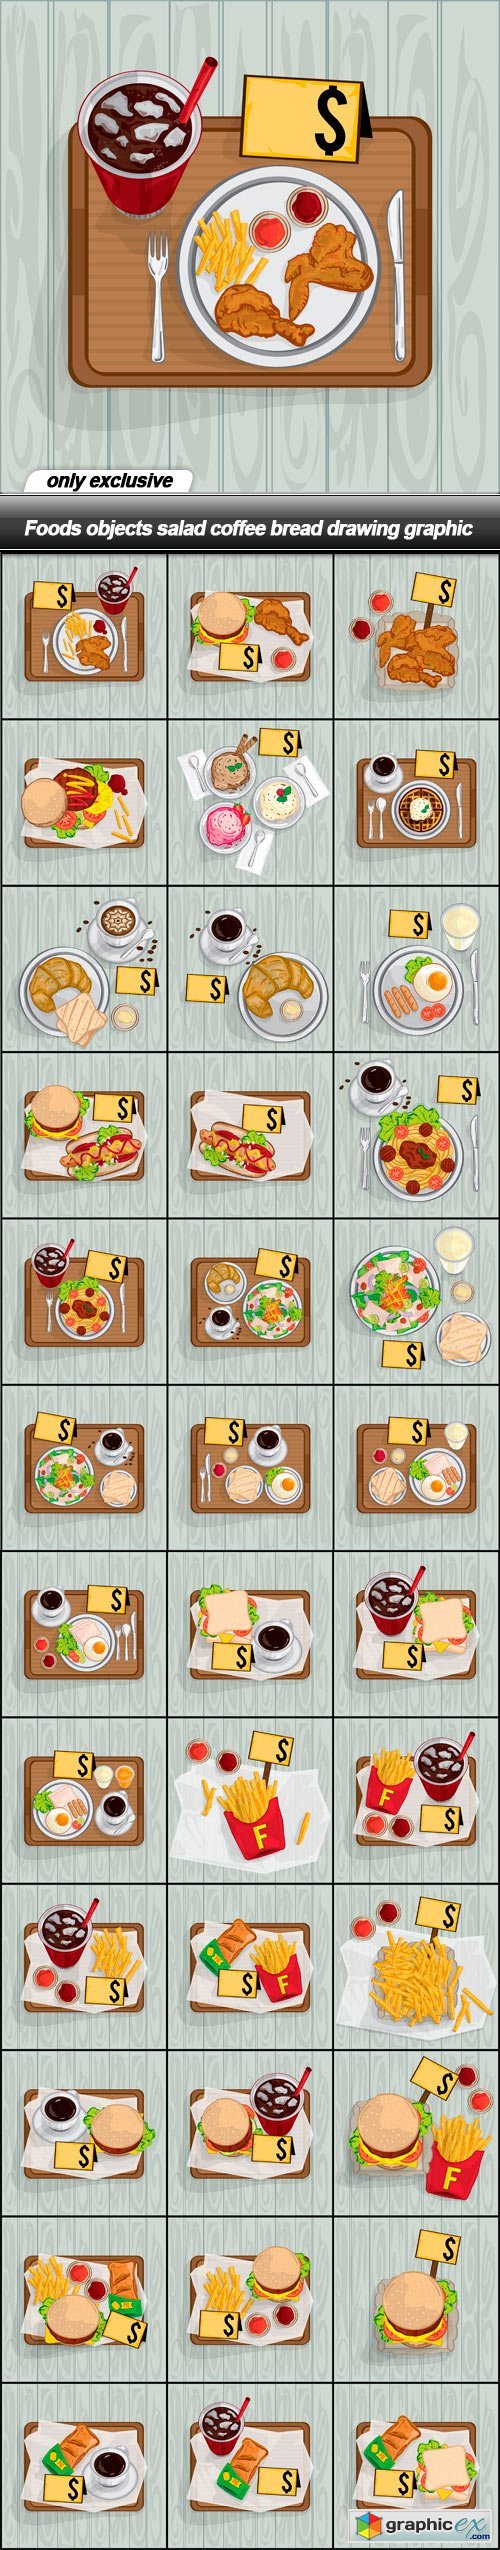 Foods objects salad coffee bread drawing graphic - 37 EPS